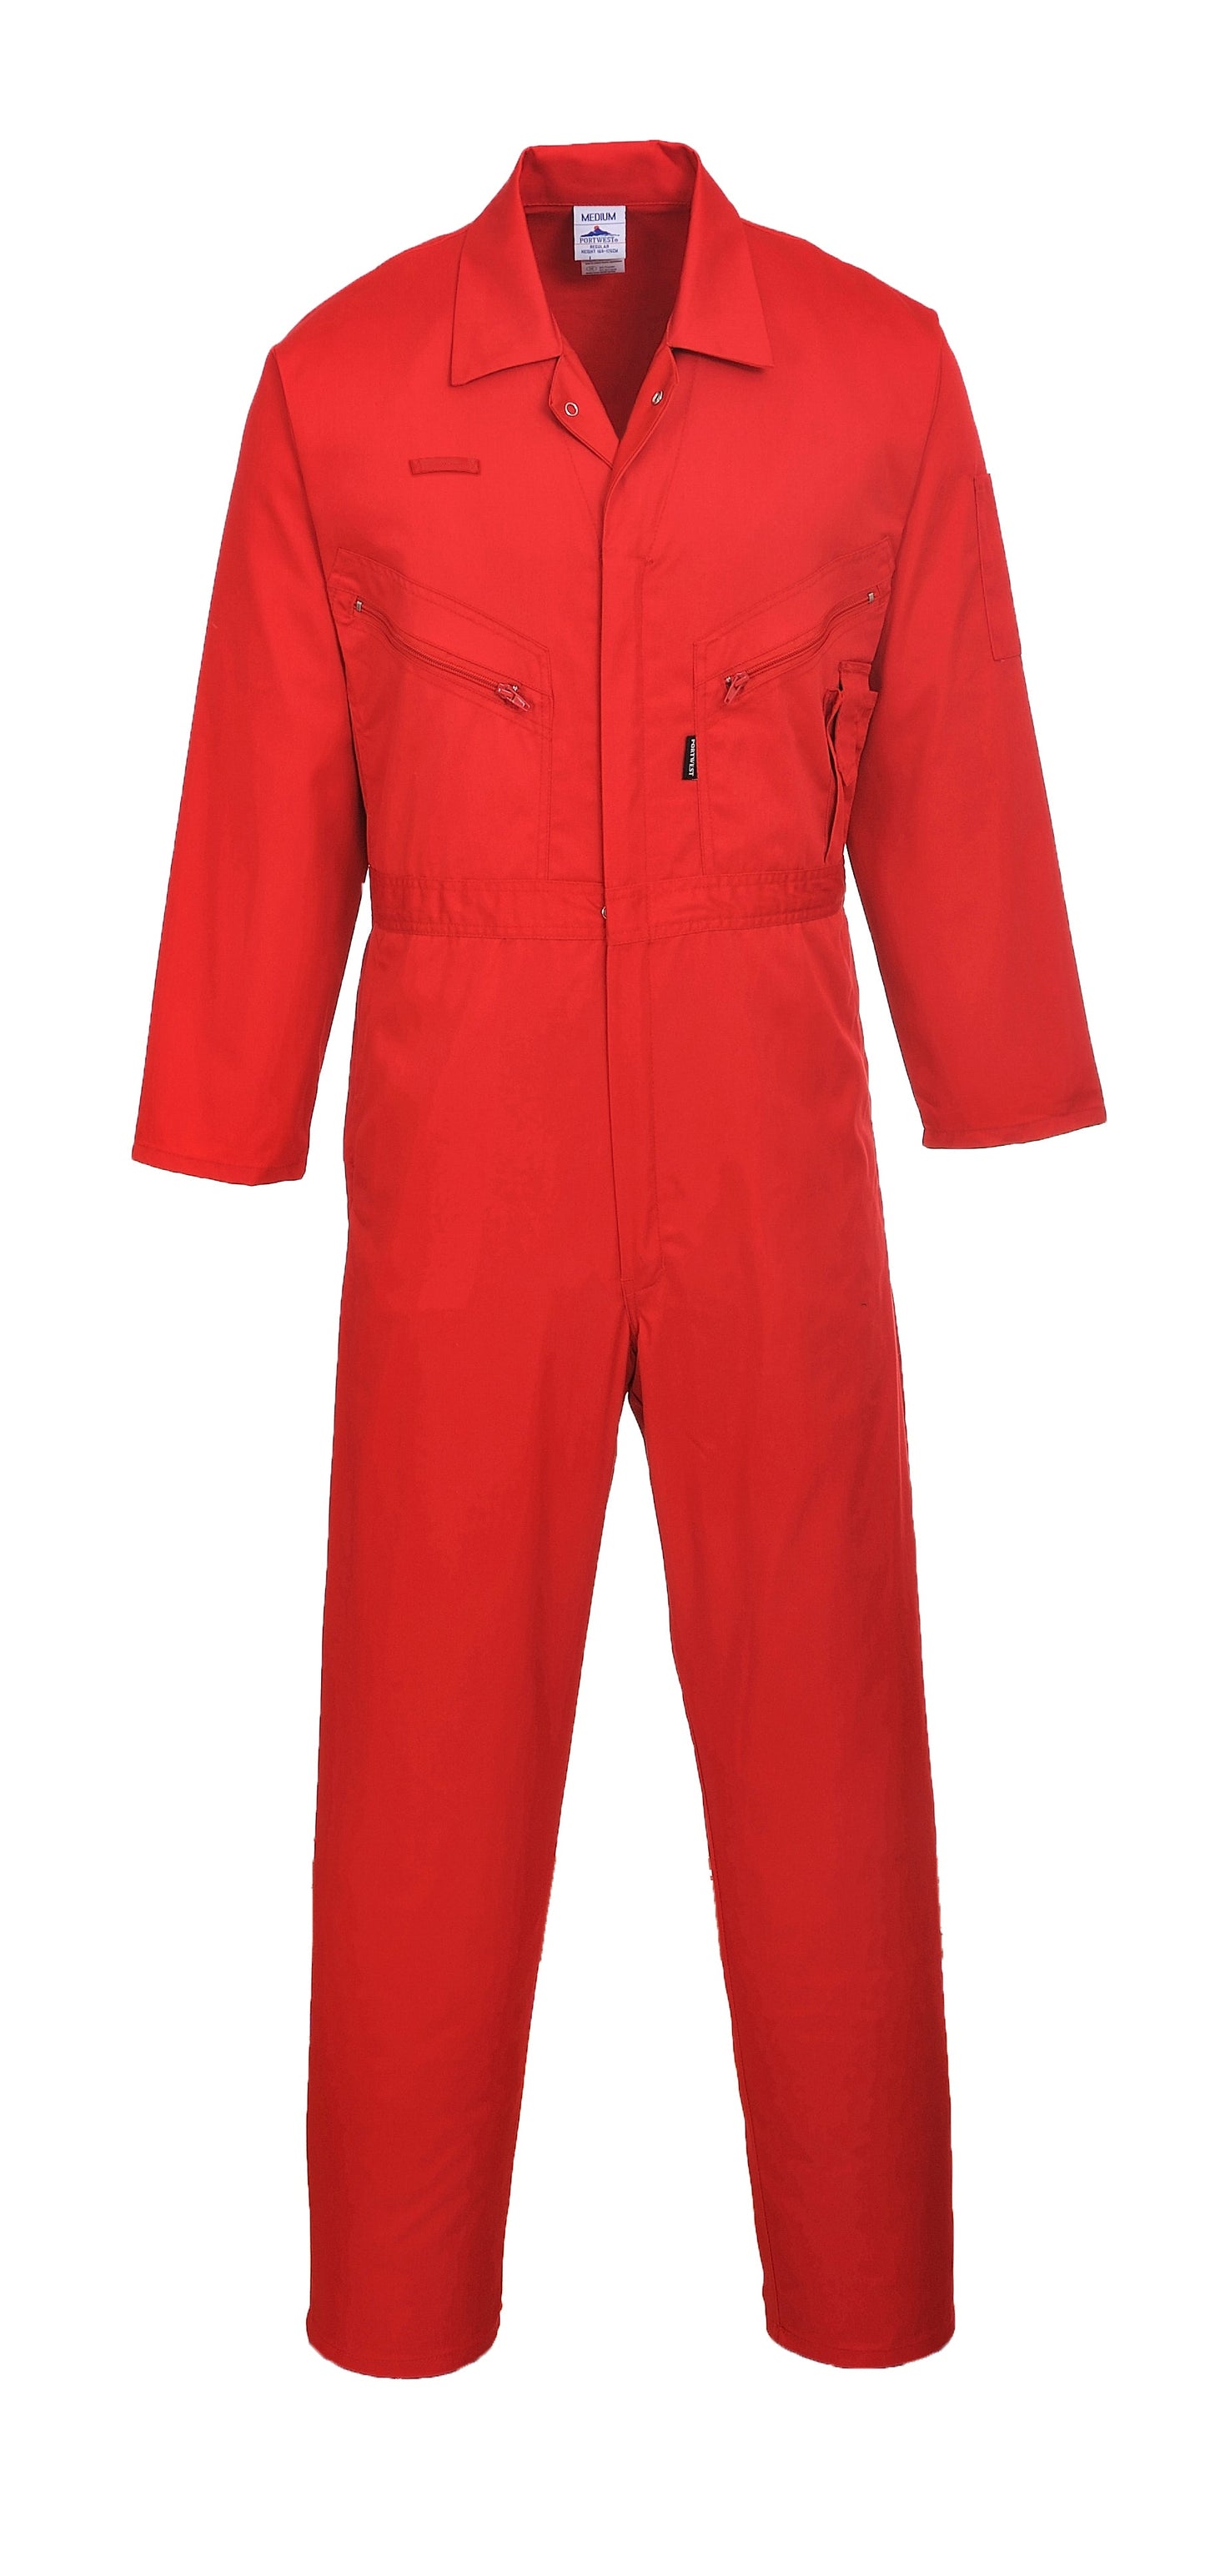 Portwest C813 Liverpool Zipper Coverall with Front Snap Closure and 2 Way Zipper - New England Safety Supply